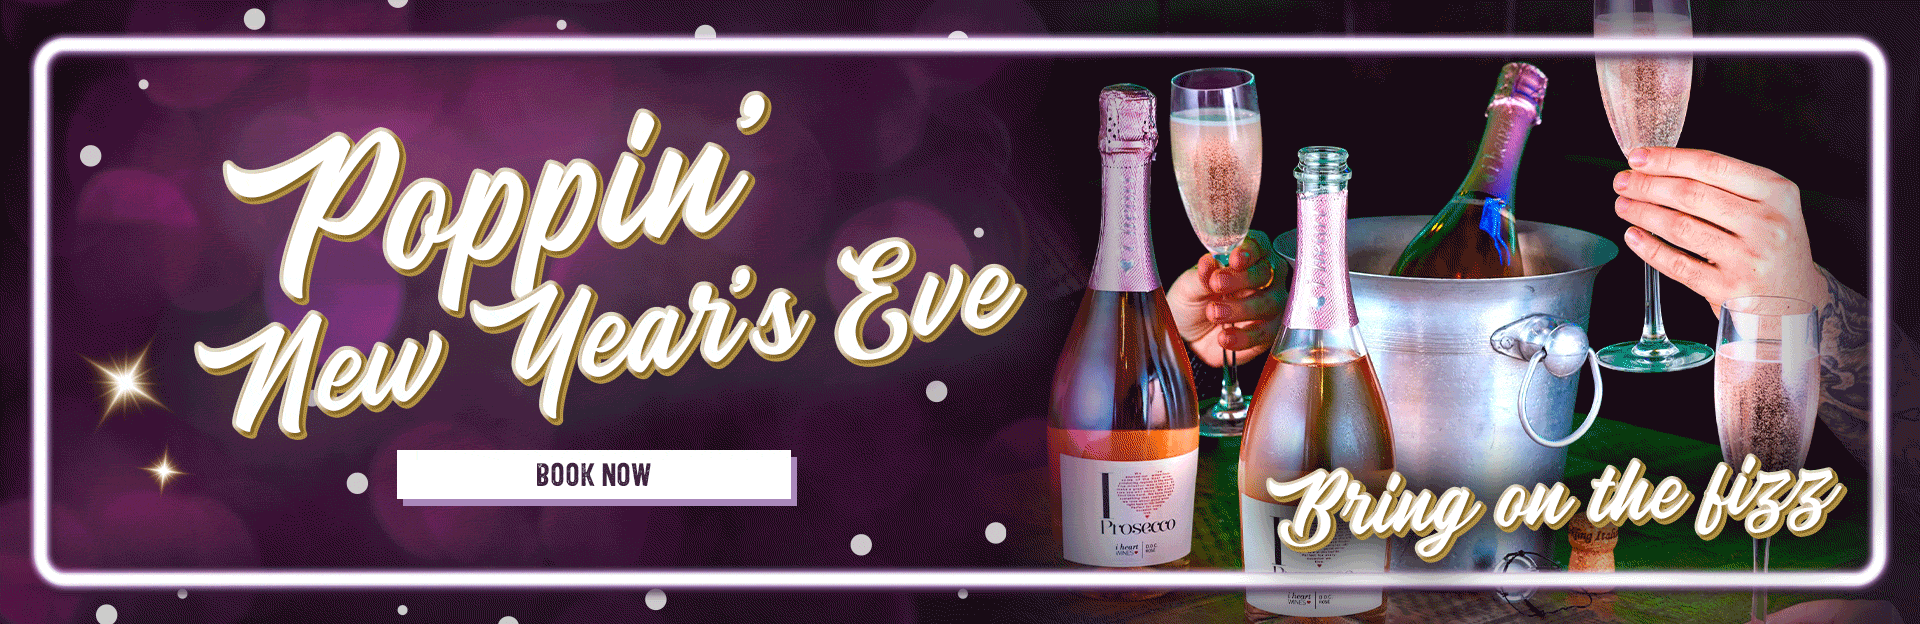 New Year’s Eve at O'Neill's Harborne 